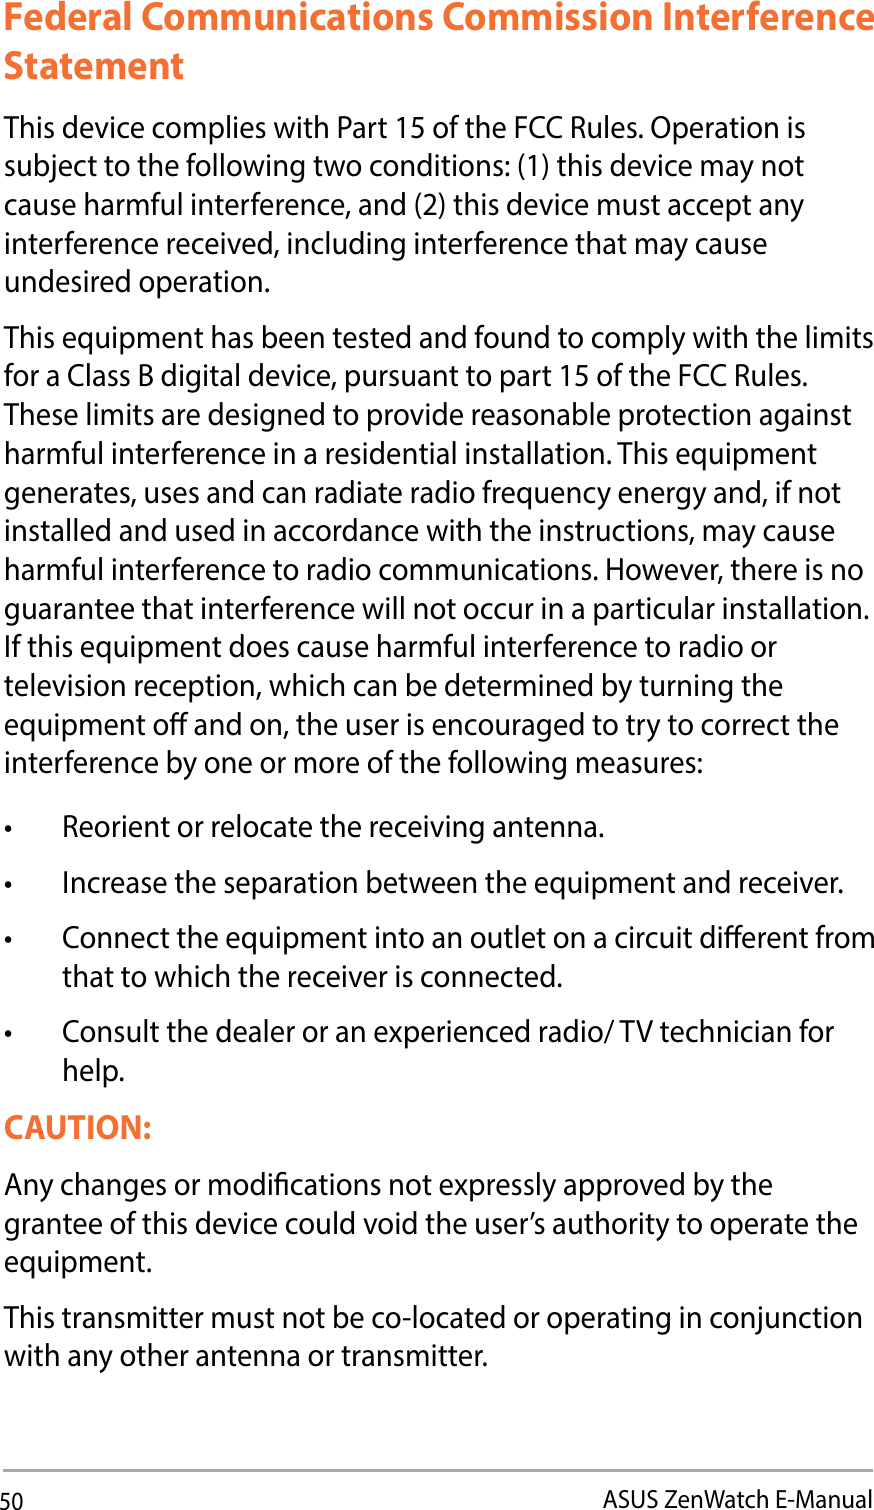 50ASUS ZenWatch E-ManualFederal Communications Commission Interference StatementThis device complies with Part 15 of the FCC Rules. Operation is subject to the following two conditions: (1) this device may not cause harmful interference, and (2) this device must accept any interference received, including interference that may cause undesired operation.5IJTFRVJQNFOUIBTCFFOUFTUFEBOEGPVOEUPDPNQMZXJUIUIFMJNJUTfor a Class B digital device, pursuant to part 15 of the FCC Rules. These limits are designed to provide reasonable protection against IBSNGVMJOUFSGFSFODFJOBSFTJEFOUJBMJOTUBMMBUJPO5IJTFRVJQNFOUHFOFSBUFTVTFTBOEDBOSBEJBUFSBEJPGSFRVFODZFOFSHZBOEJGOPUinstalled and used in accordance with the instructions, may cause harmful interference to radio communications. However, there is no guarantee that interference will not occur in a particular installation. *GUIJTFRVJQNFOUEPFTDBVTFIBSNGVMJOUFSGFSFODFUPSBEJPPStelevision reception, which can be determined by turning the FRVJQNFOUPòBOEPOUIFVTFSJTFODPVSBHFEUPUSZUPDPSSFDUUIFinterference by one or more of the following measures:t 3FPSJFOUPSSFMPDBUFUIFSFDFJWJOHBOUFOOBt *ODSFBTFUIFTFQBSBUJPOCFUXFFOUIFFRVJQNFOUBOESFDFJWFSt $POOFDUUIFFRVJQNFOUJOUPBOPVUMFUPOBDJSDVJUEJòFSFOUGSPNthat to which the receiver is connected.t $POTVMUUIFEFBMFSPSBOFYQFSJFODFESBEJP57UFDIOJDJBOGPShelp.CAUTION: Any changes or modications not expressly approved by the grantee of this device could void the user’s authority to operate the FRVJQNFOUThis transmitter must not be co-located or operating in conjunction with any other antenna or transmitter. 